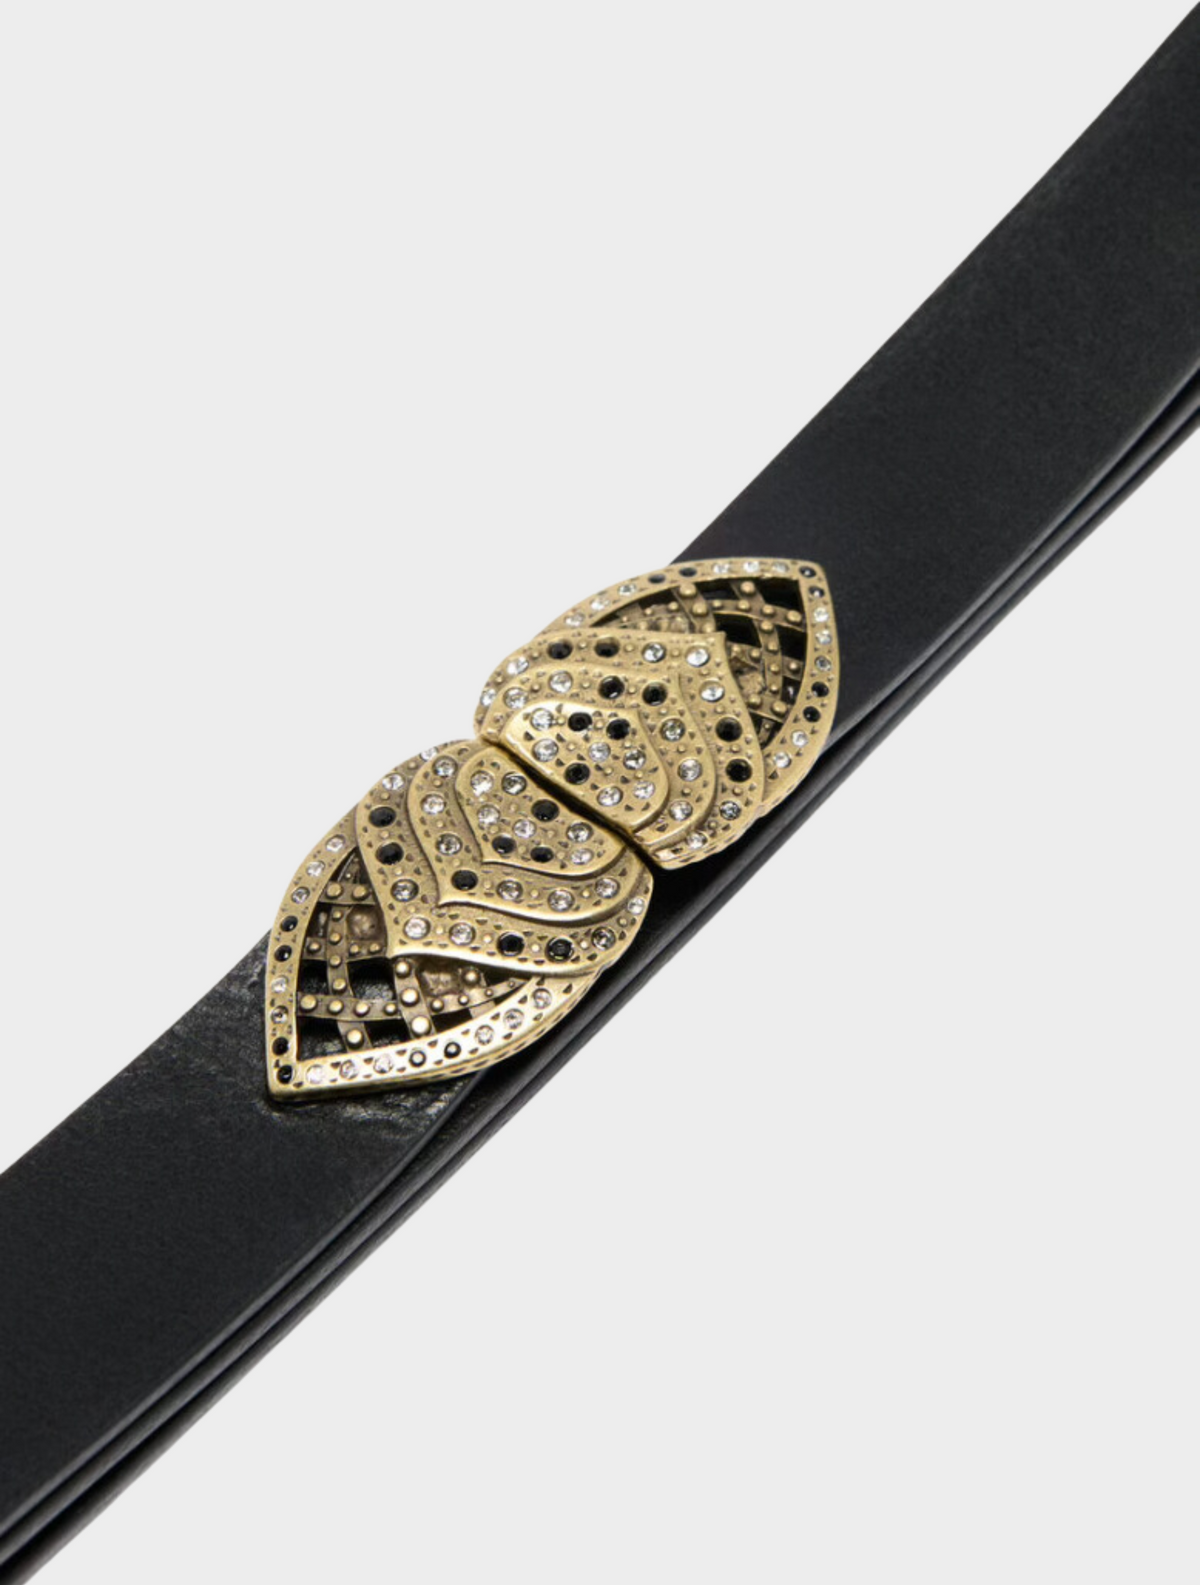 Black leather belt adjustable at the back with a gold metallic buckle that clips at the front with small crystals